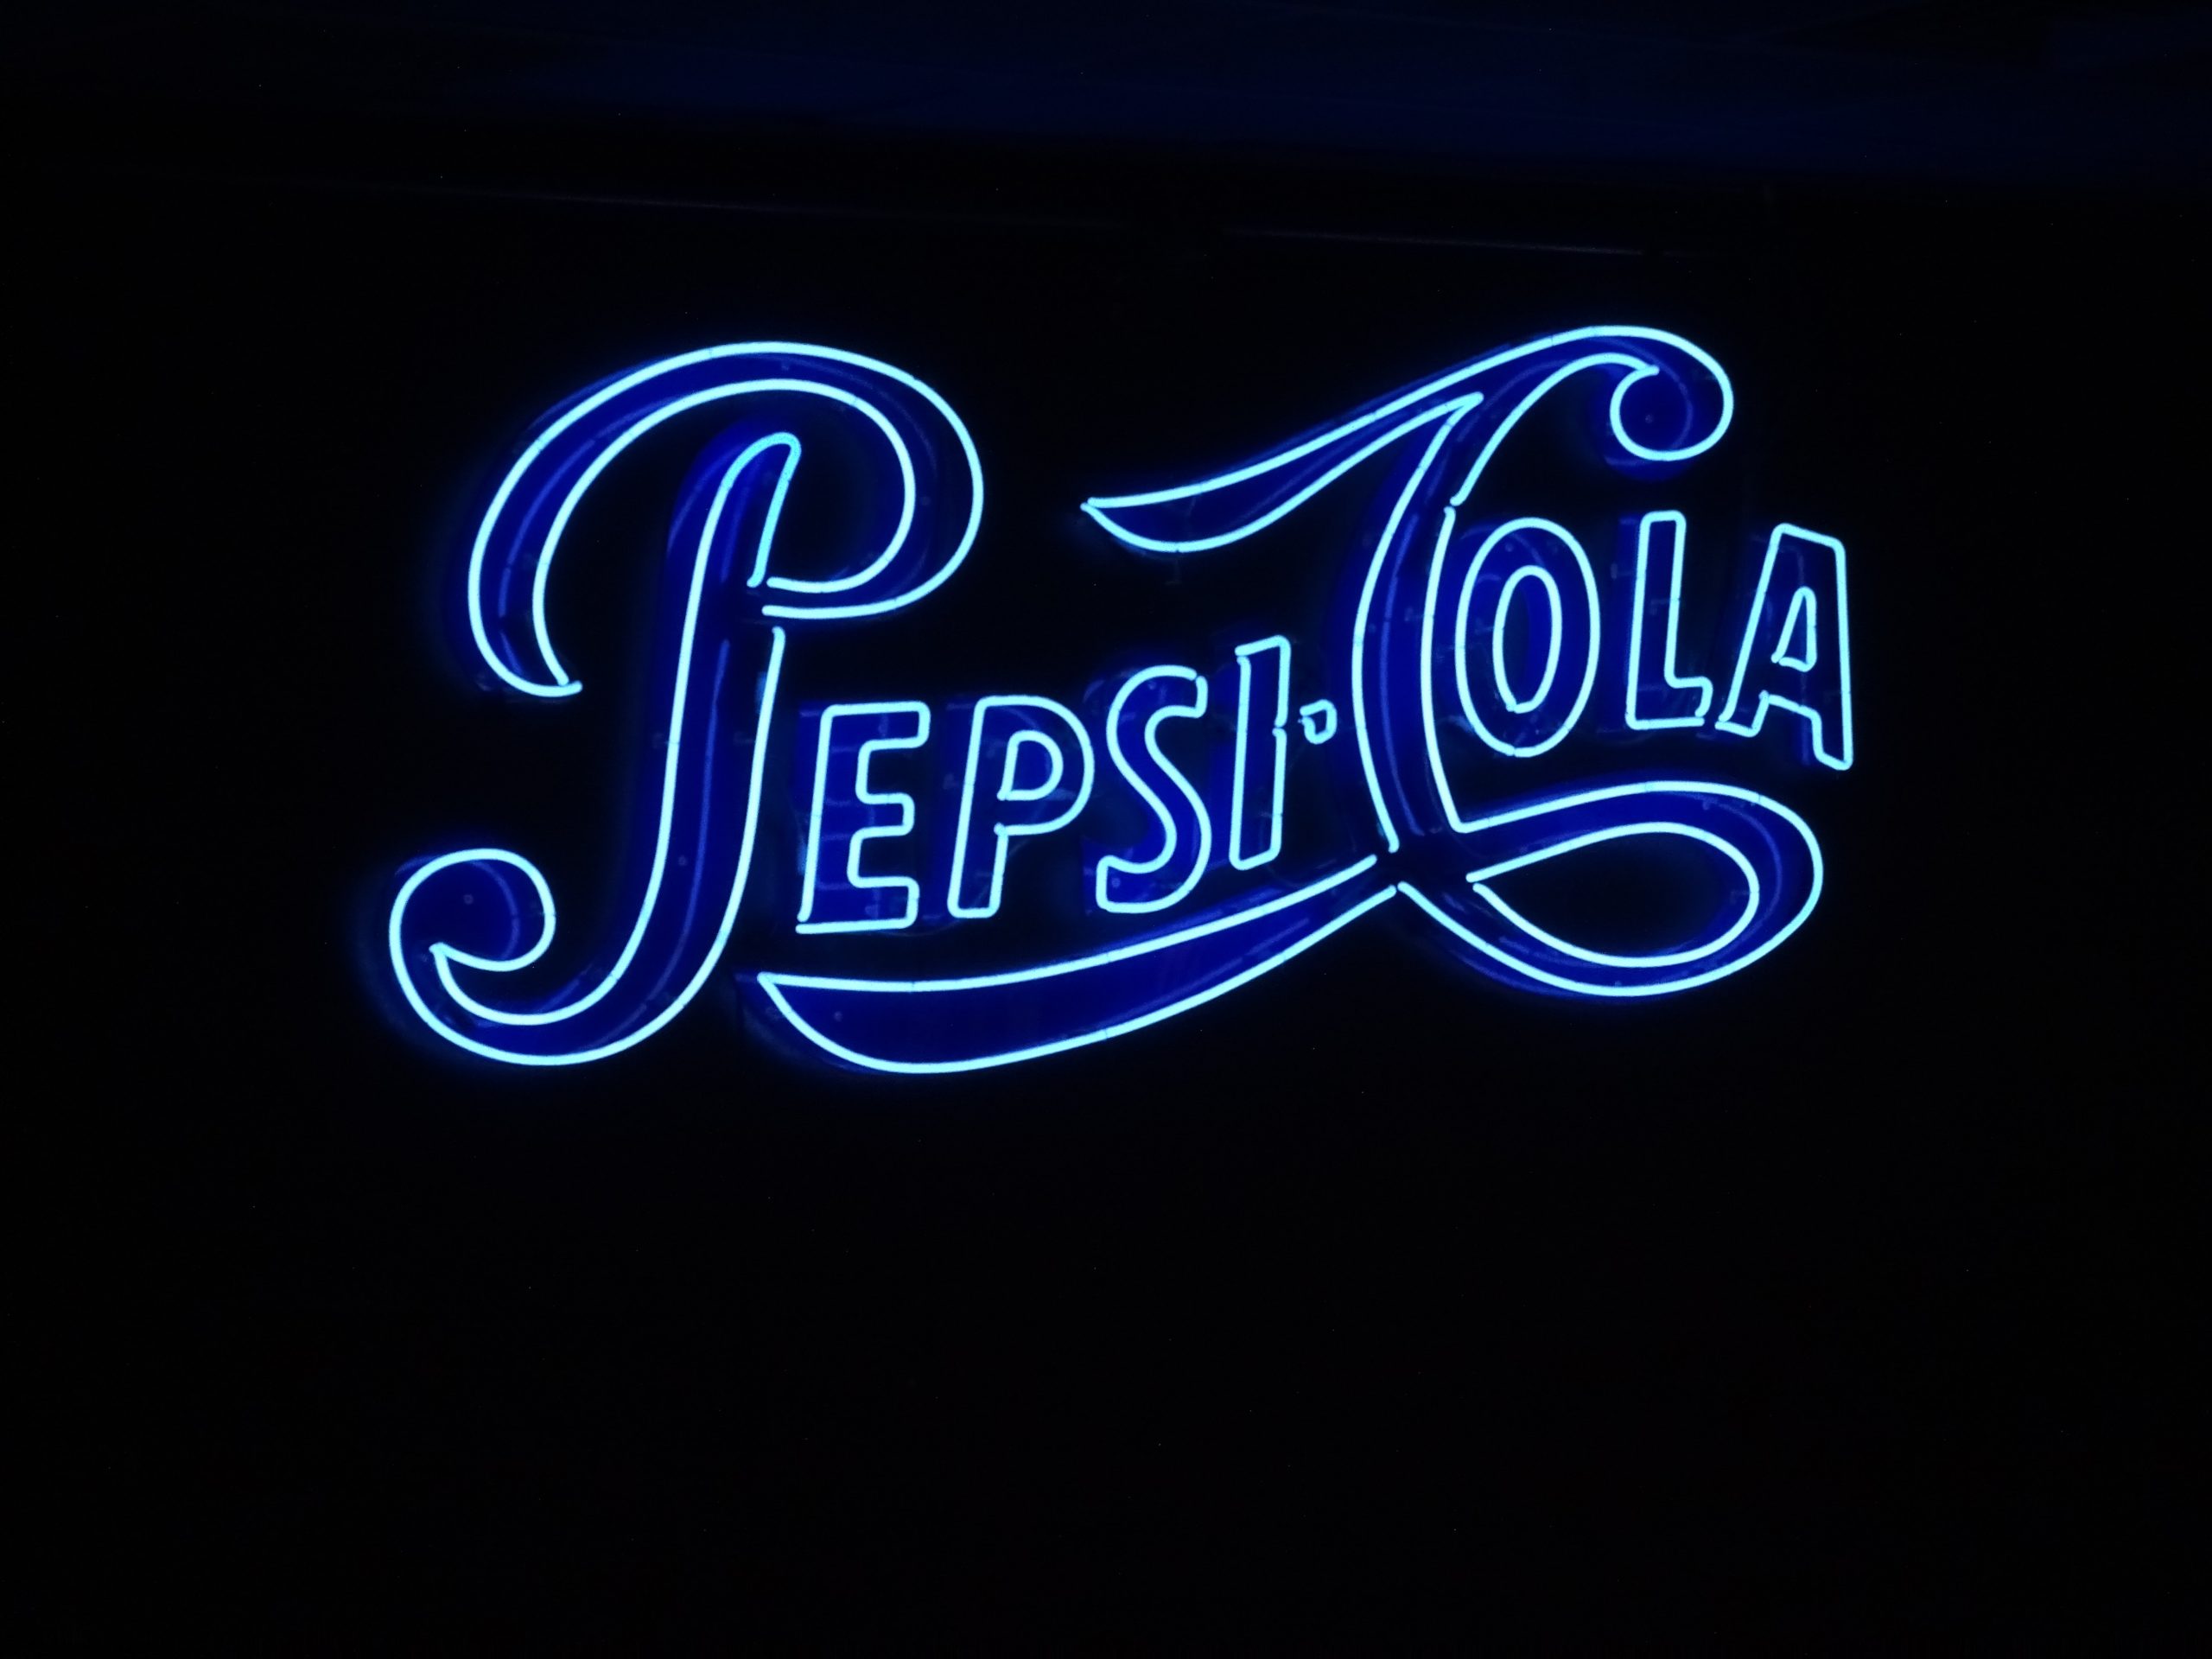 In an article about the Pepsi company, a blue neon sign reads 'Pepsi-Cola.'